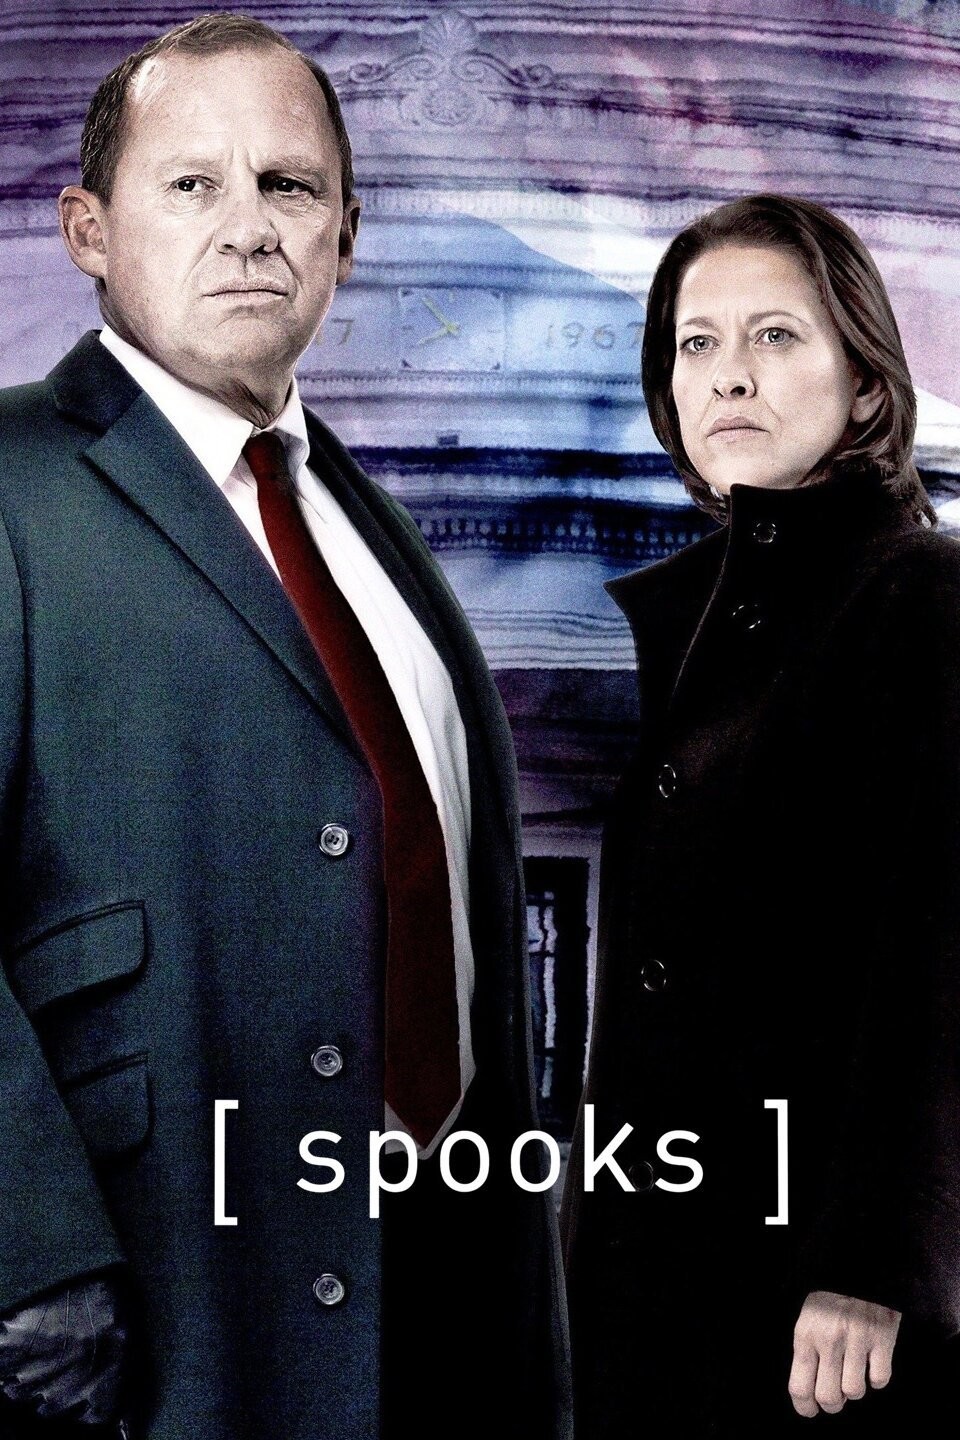 Spooks: This Is The End – Life of Wylie